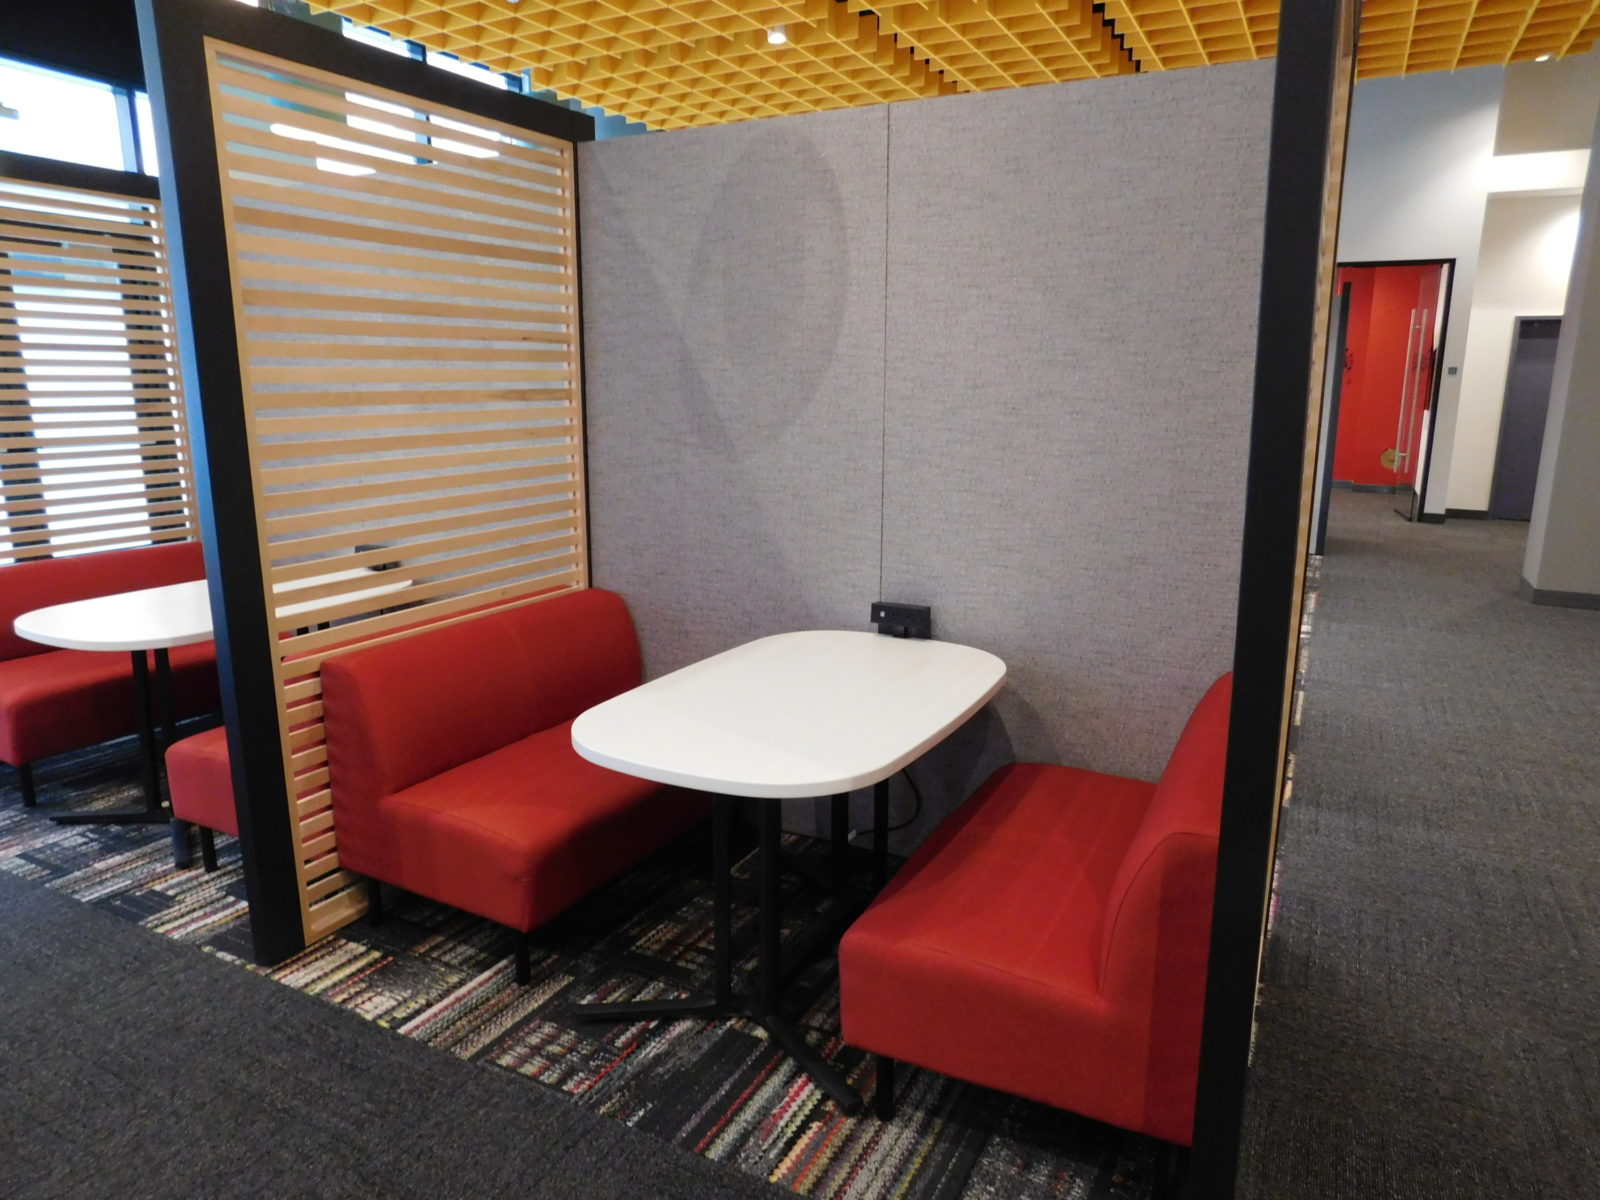 Interior of a Herman Miller Overlay unit. Two identical units side-by-side, with red fabric 2-seater booths on either side of a white table.